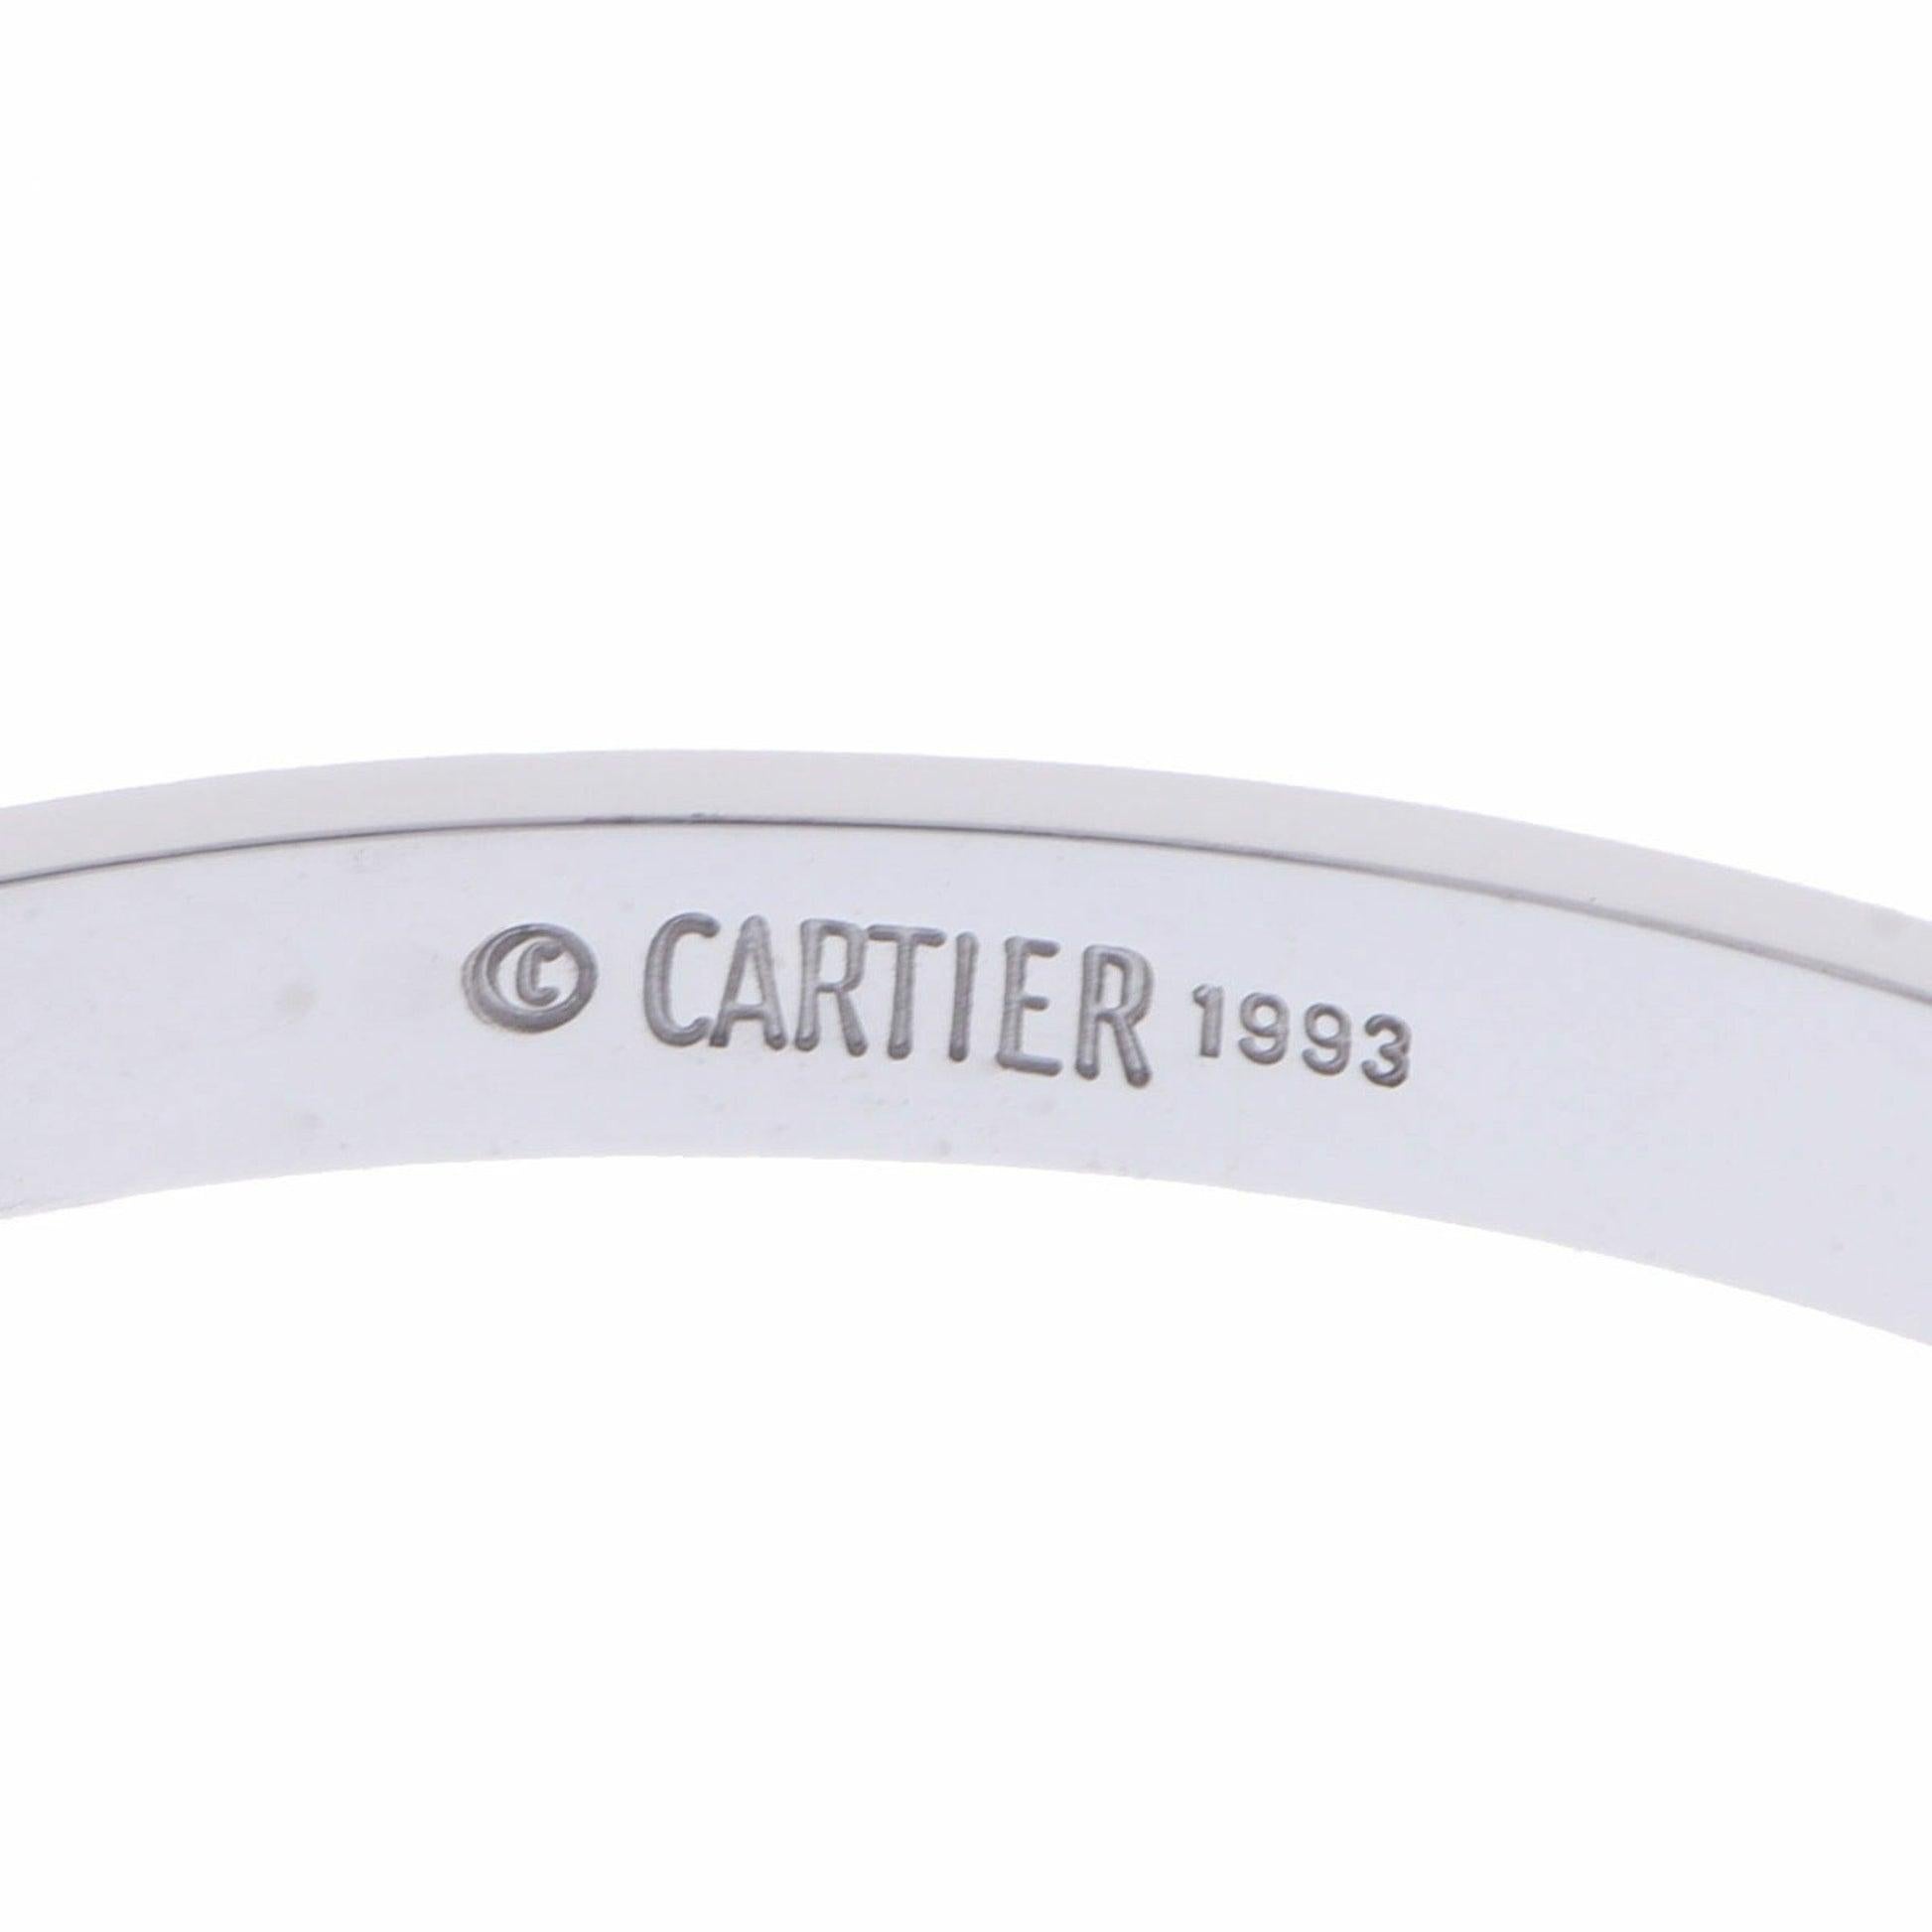 Cartier Love Bracelet in 18K White Gold

Additional Information:
Brand: Cartier
Gender: Men,Women
Line: Love
Material: White gold (18K)
Condition details: This item has been used and may have some minor flaws. Before purchasing, please refer to the